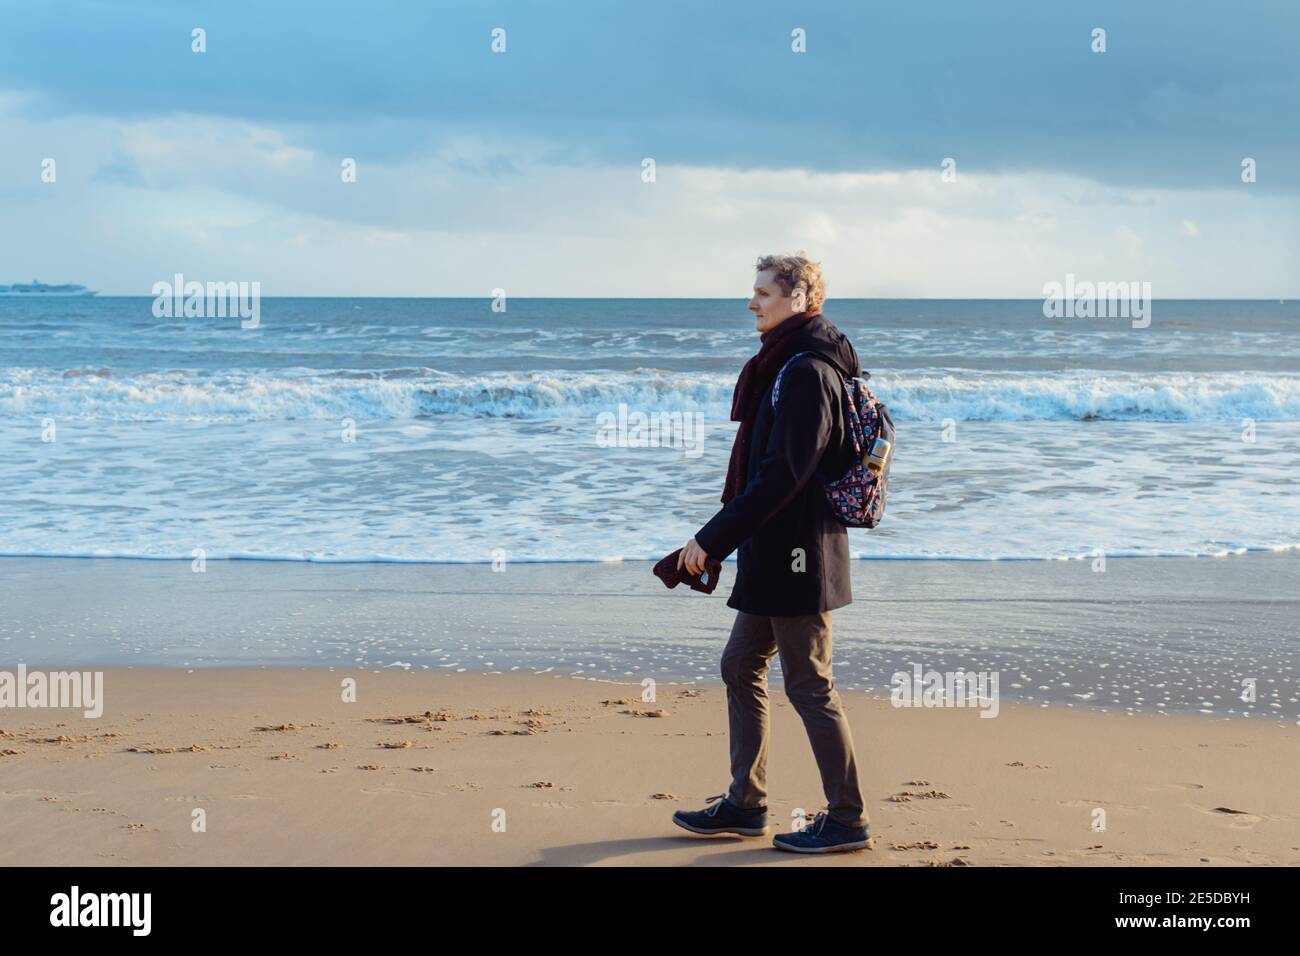 A young man in warm clothes with backpack walking on winter seaside and enjoying the moment. Relax during a walk on the coast. Simple pleasures Stock Photo